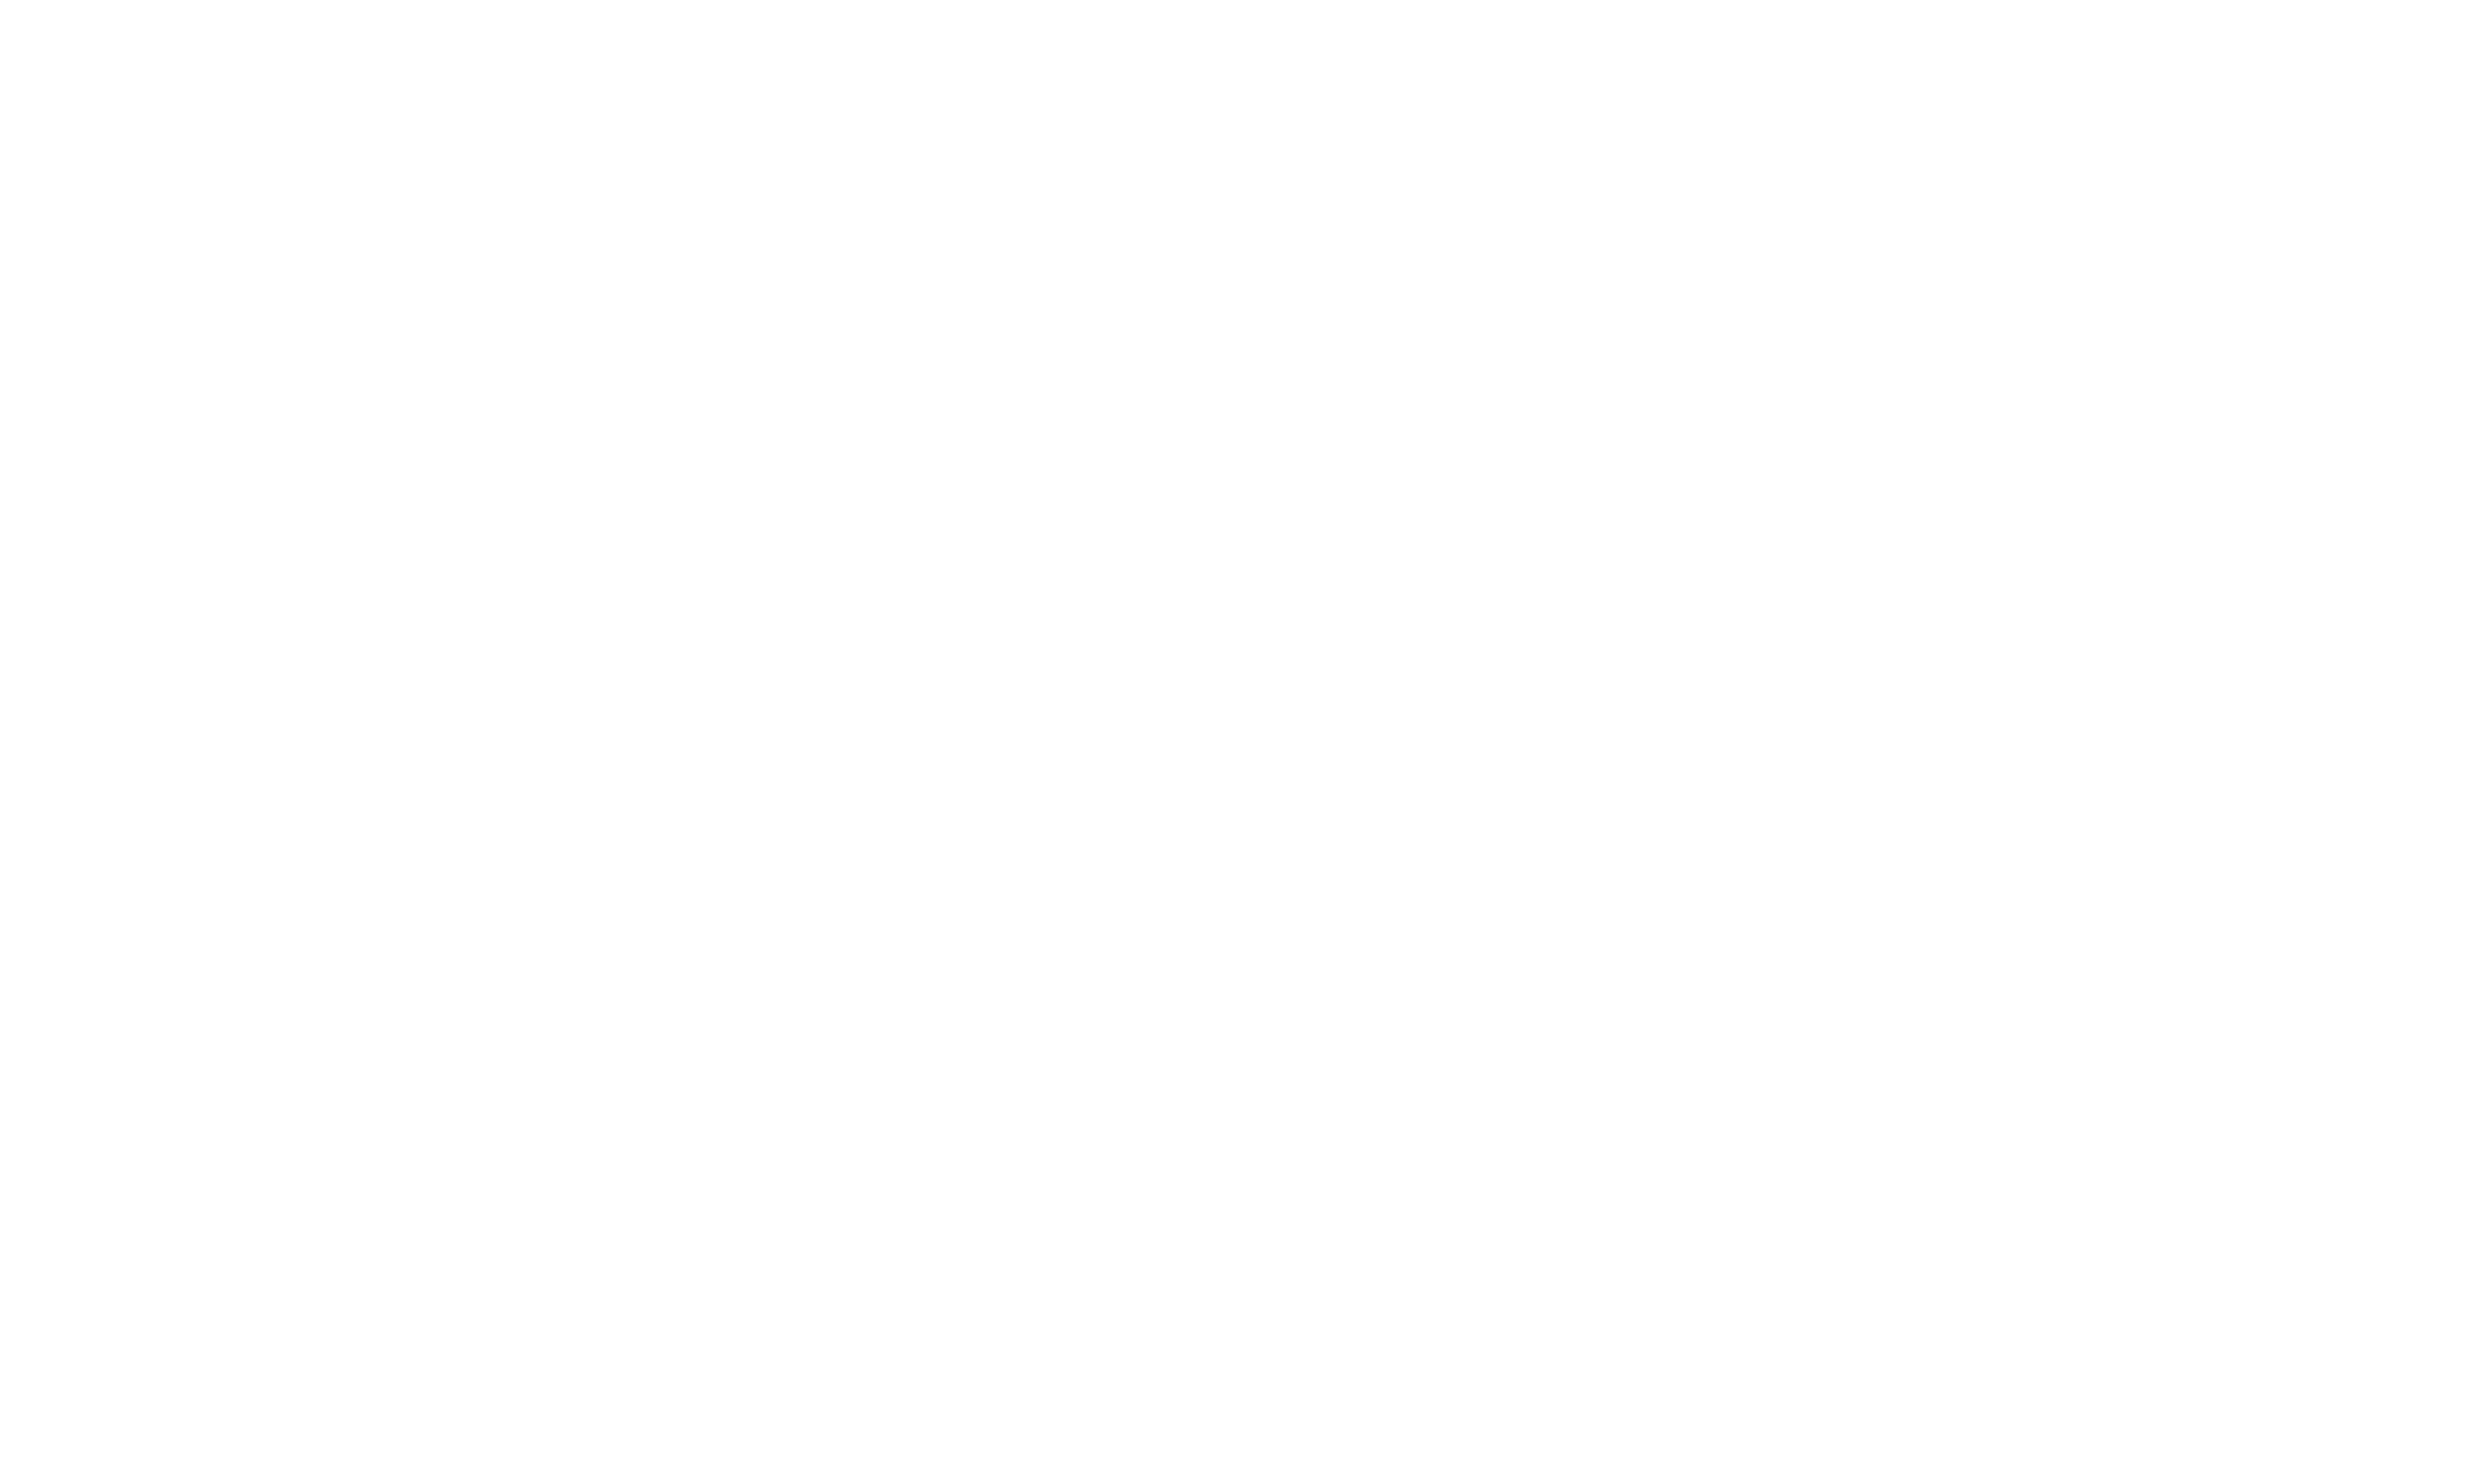 AGORA MANAGERS GROUPE